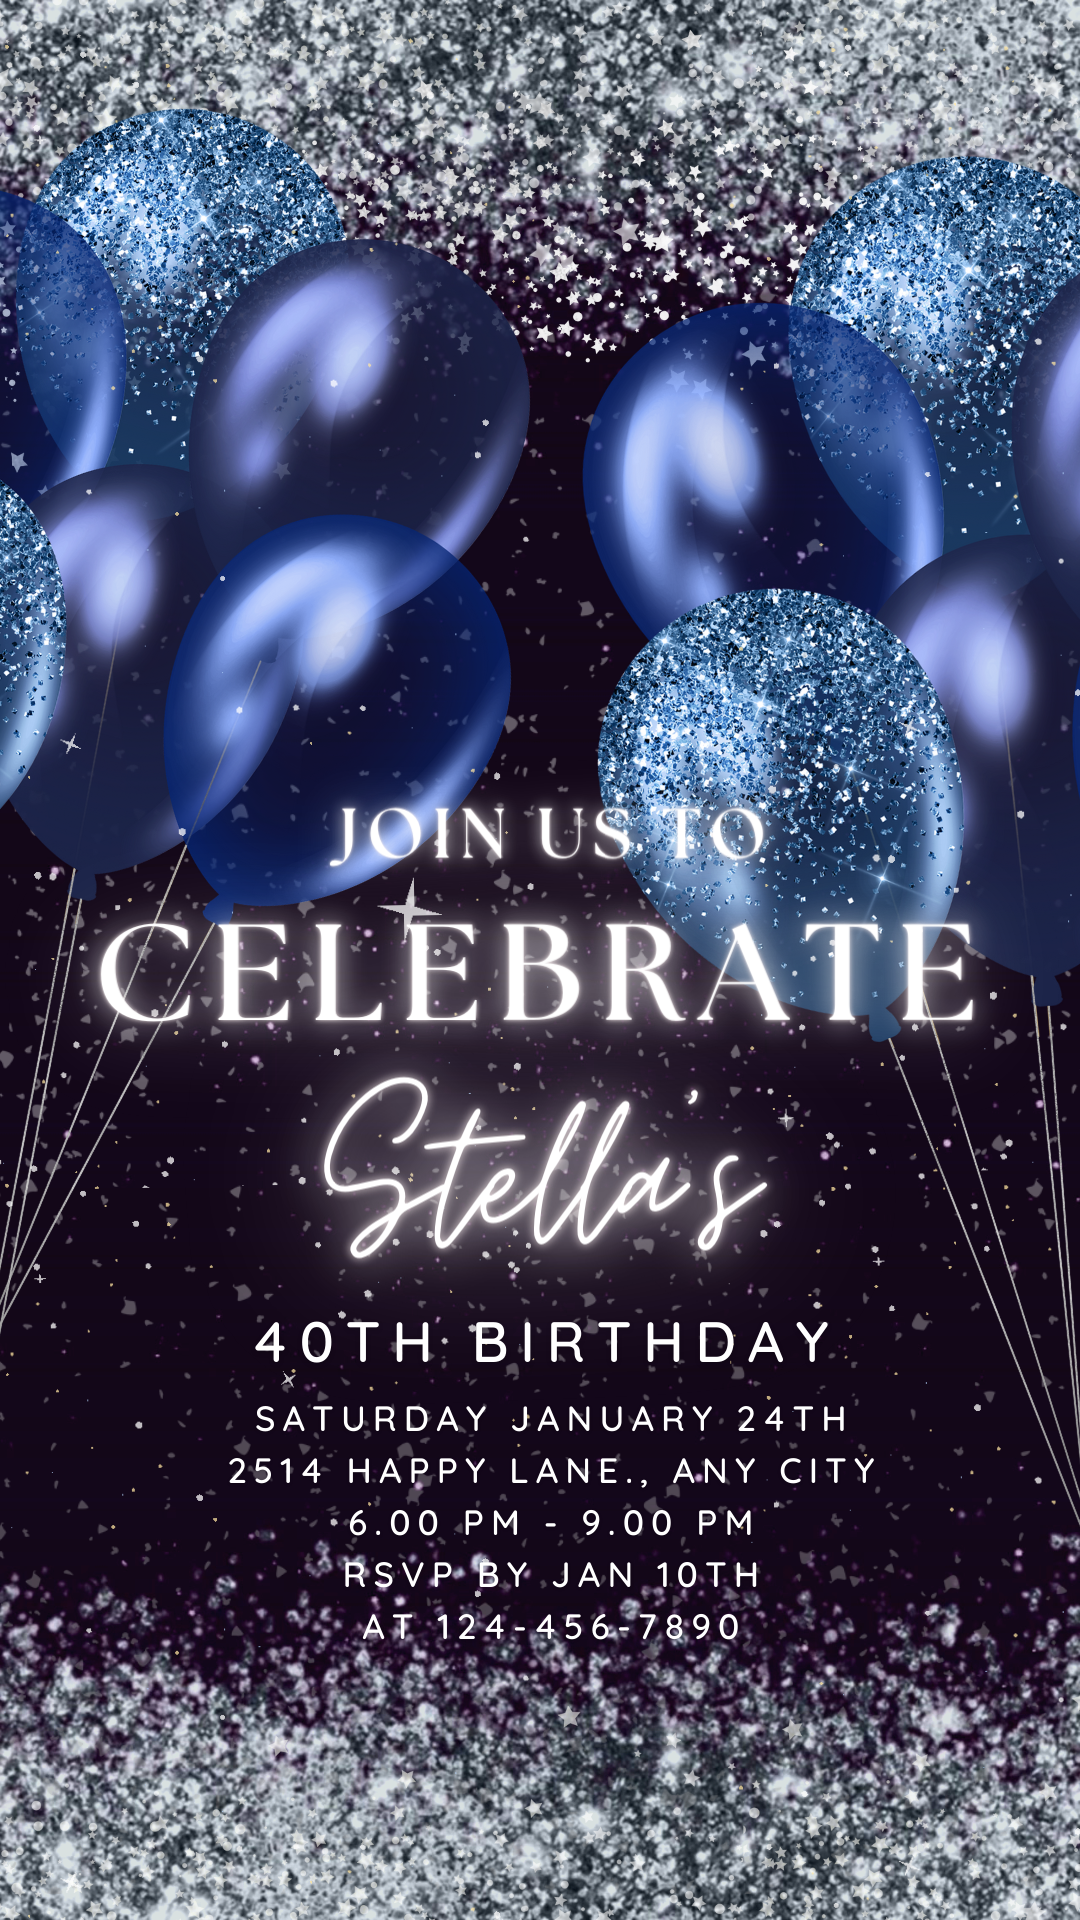 Blue & Silver Animated Party Invite for any Event Celebration, Editable Video Template, Birthday invitation for any Age | Digital E-vite